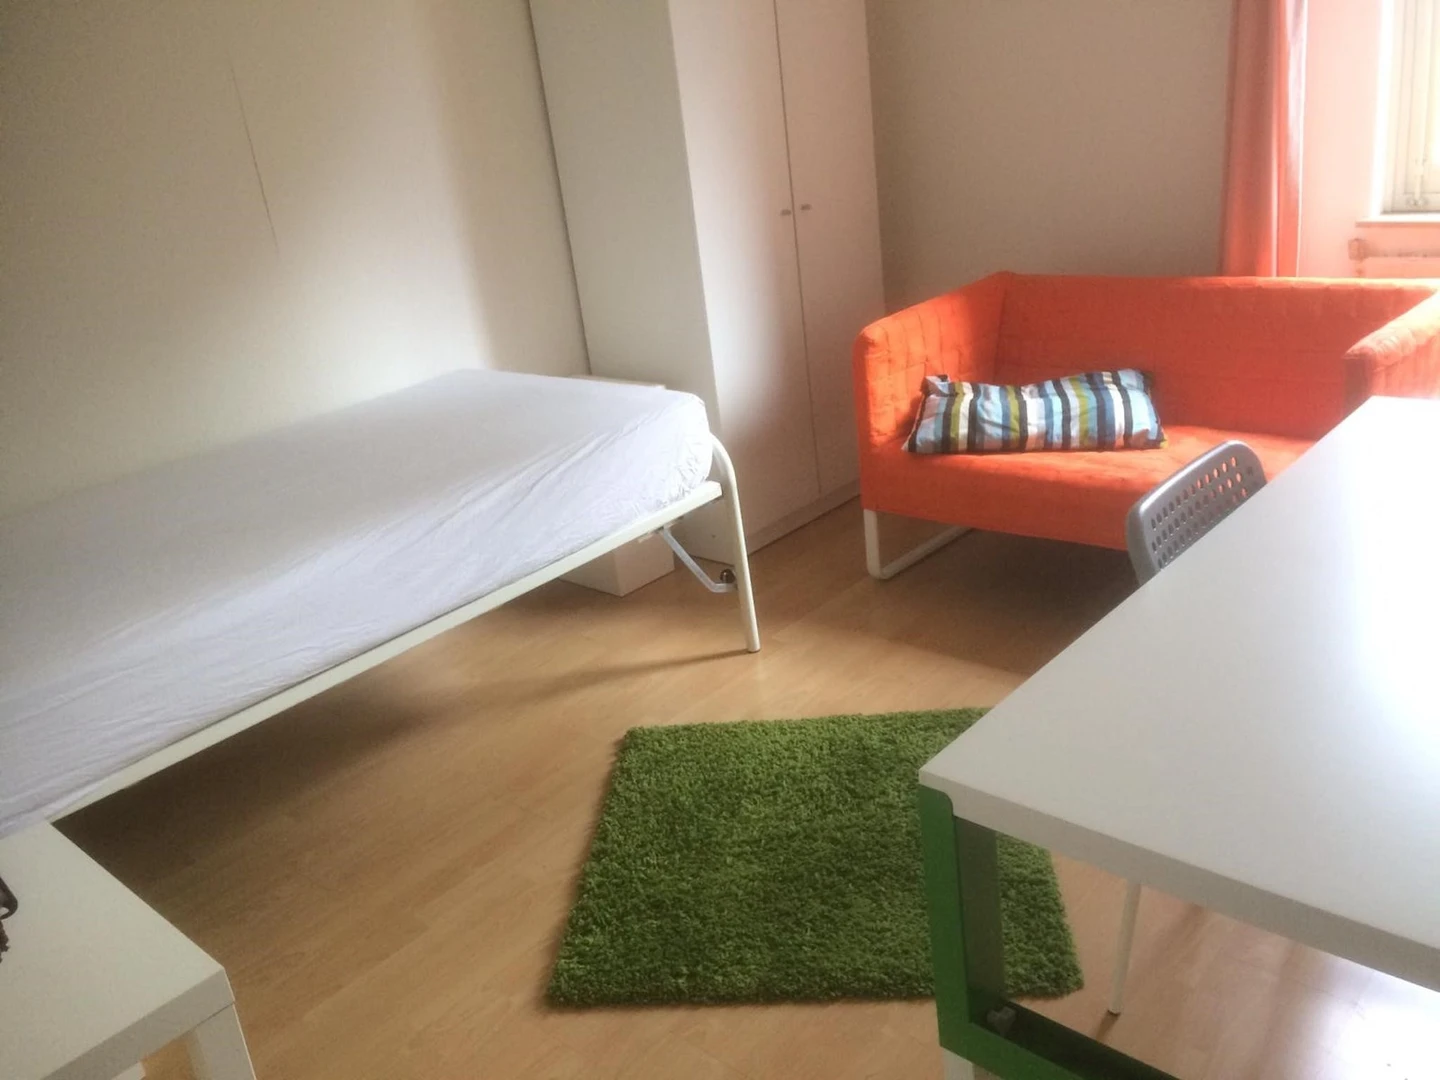 Renting rooms by the month in Maastricht